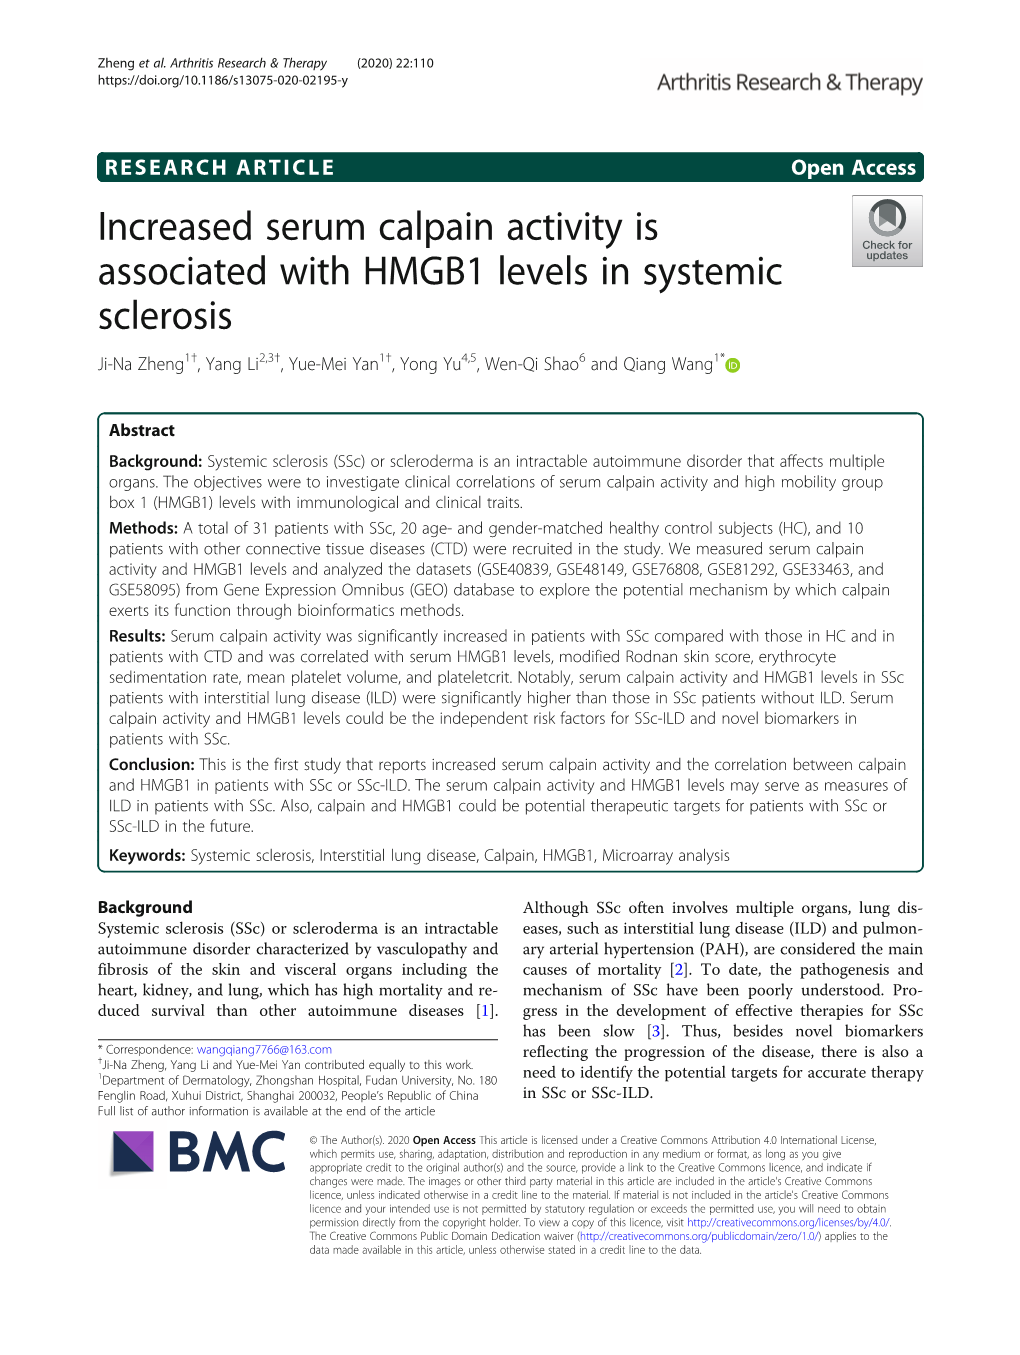 Increased Serum Calpain Activity Is Associated with HMGB1 Levels In